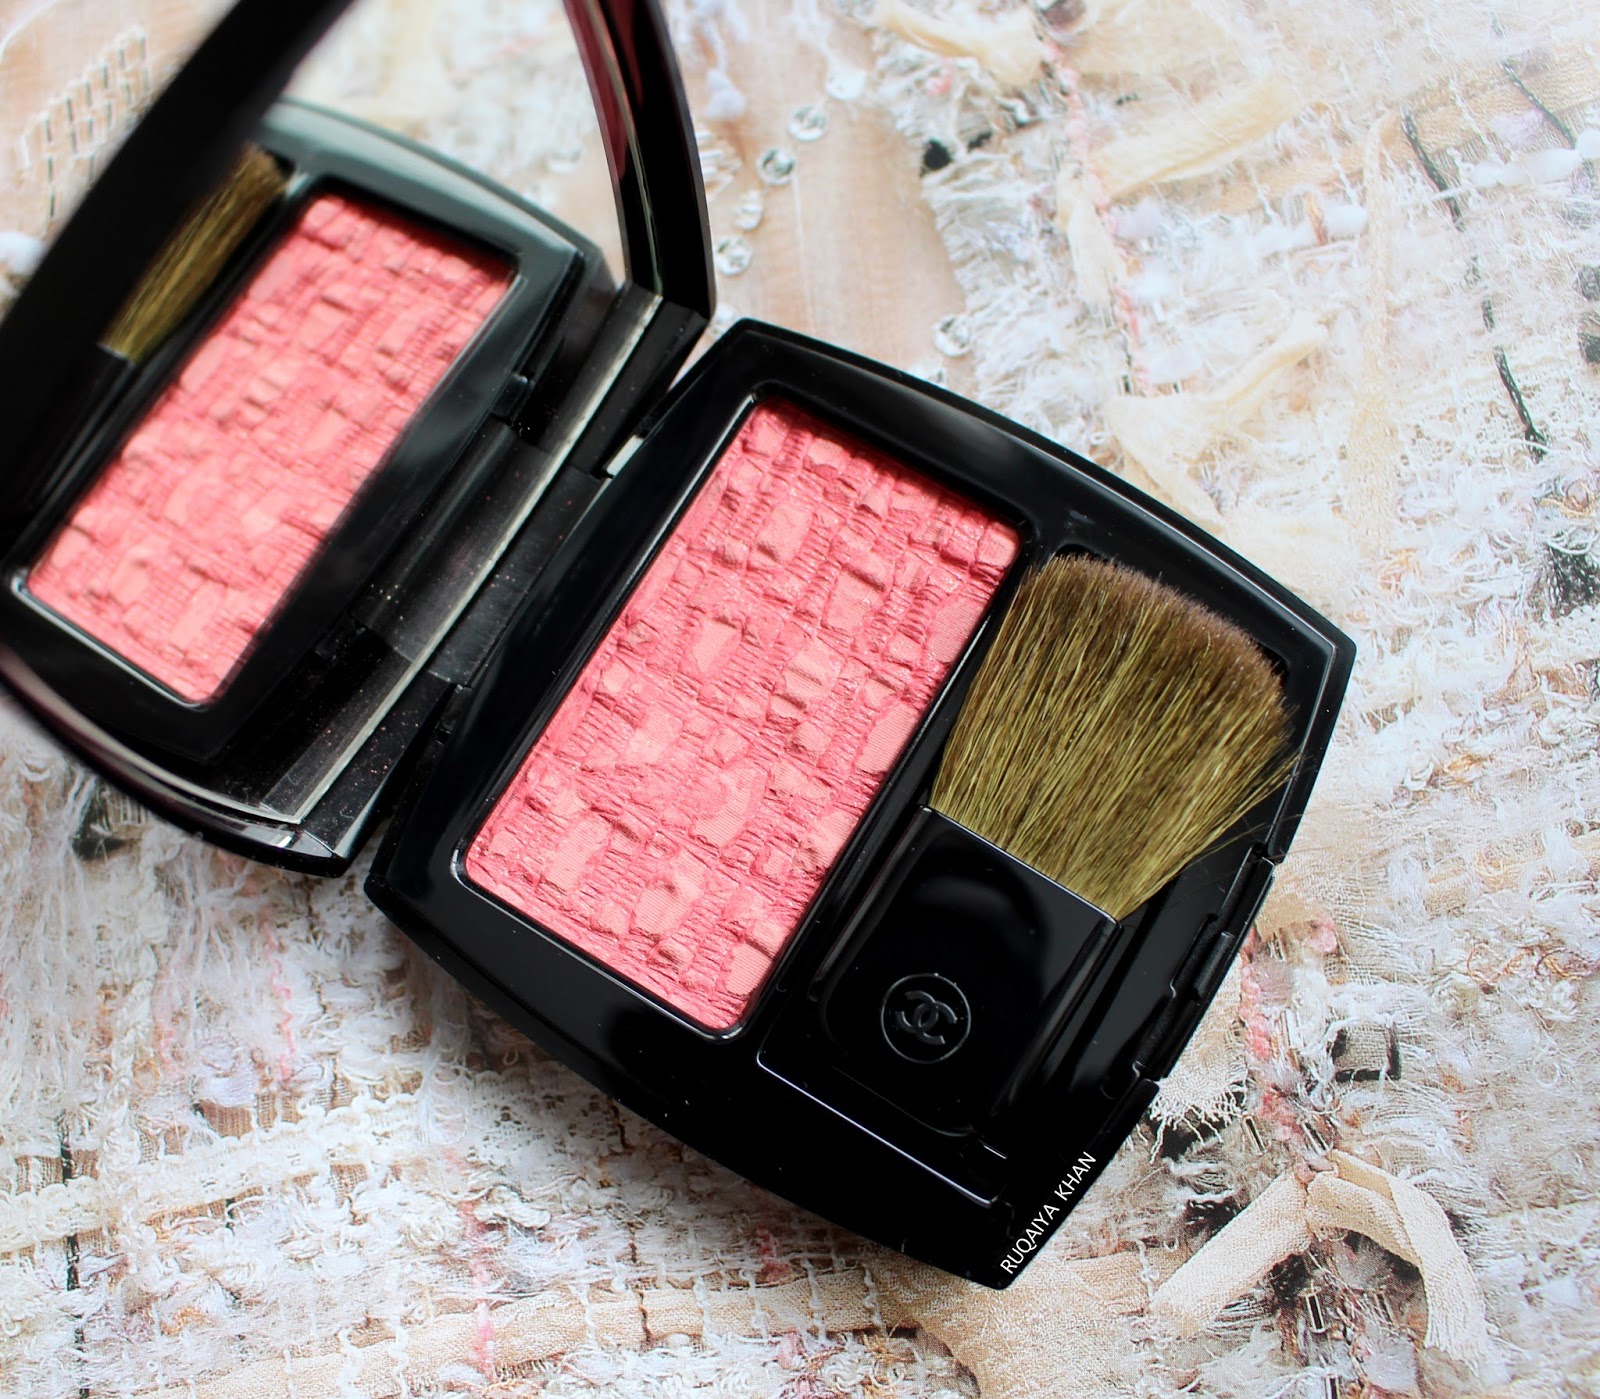 Ruqaiya Khan: LES TISSAGES DE CHANEL Blush Duo Tweed Effect for 2018 in 130  TWEED EVANESCENT - Review and Swatches